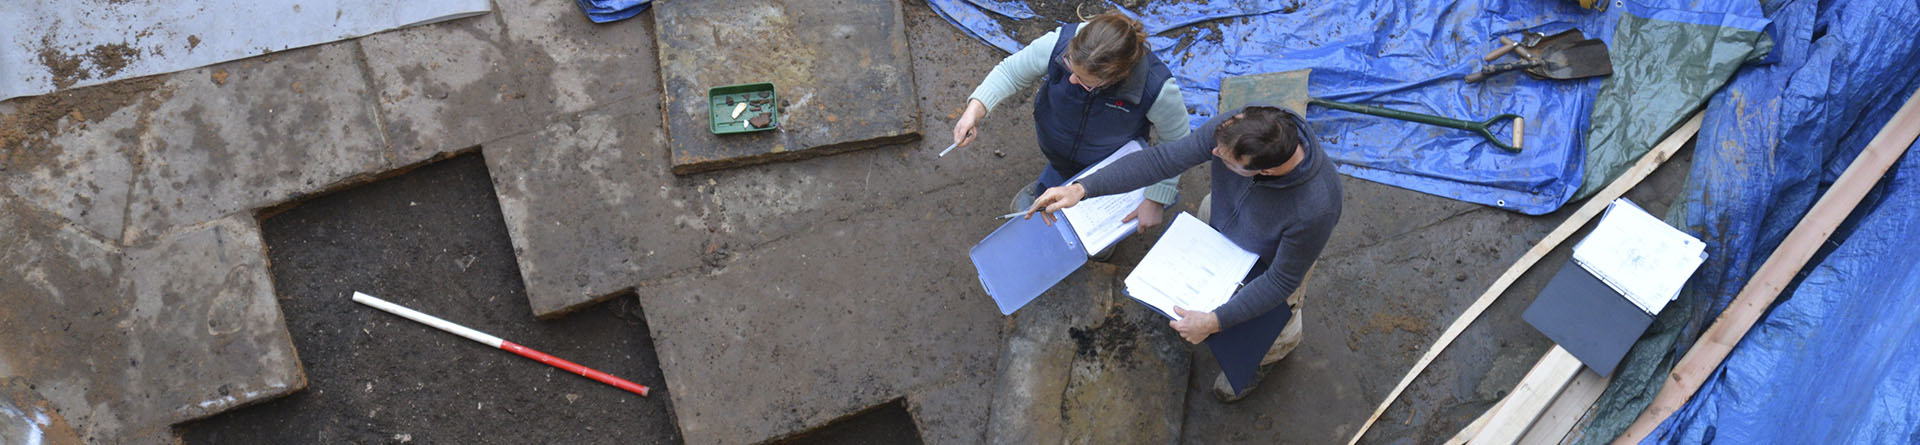 A view looking down into the interior of the tower, showing two archaeologists discussing and recording the trench in front of them.